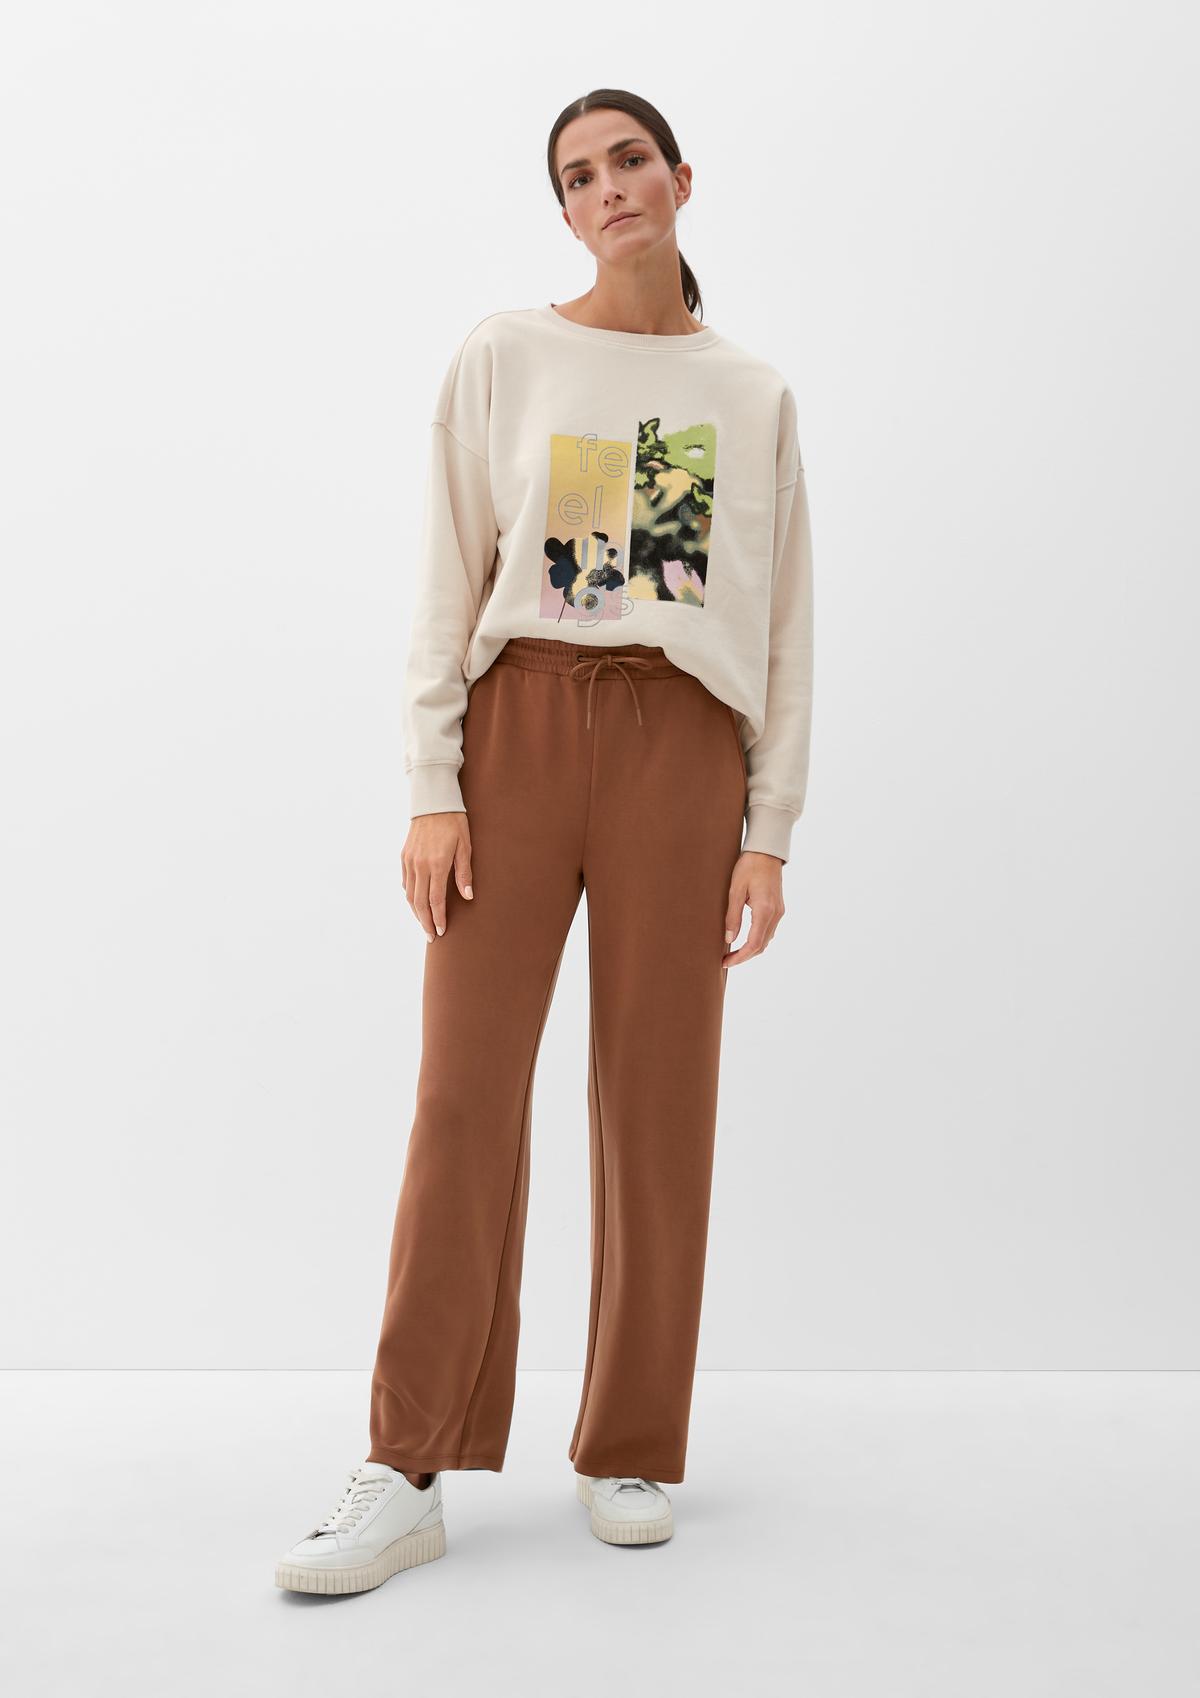 Tracksuit-style trousers with a wide leg